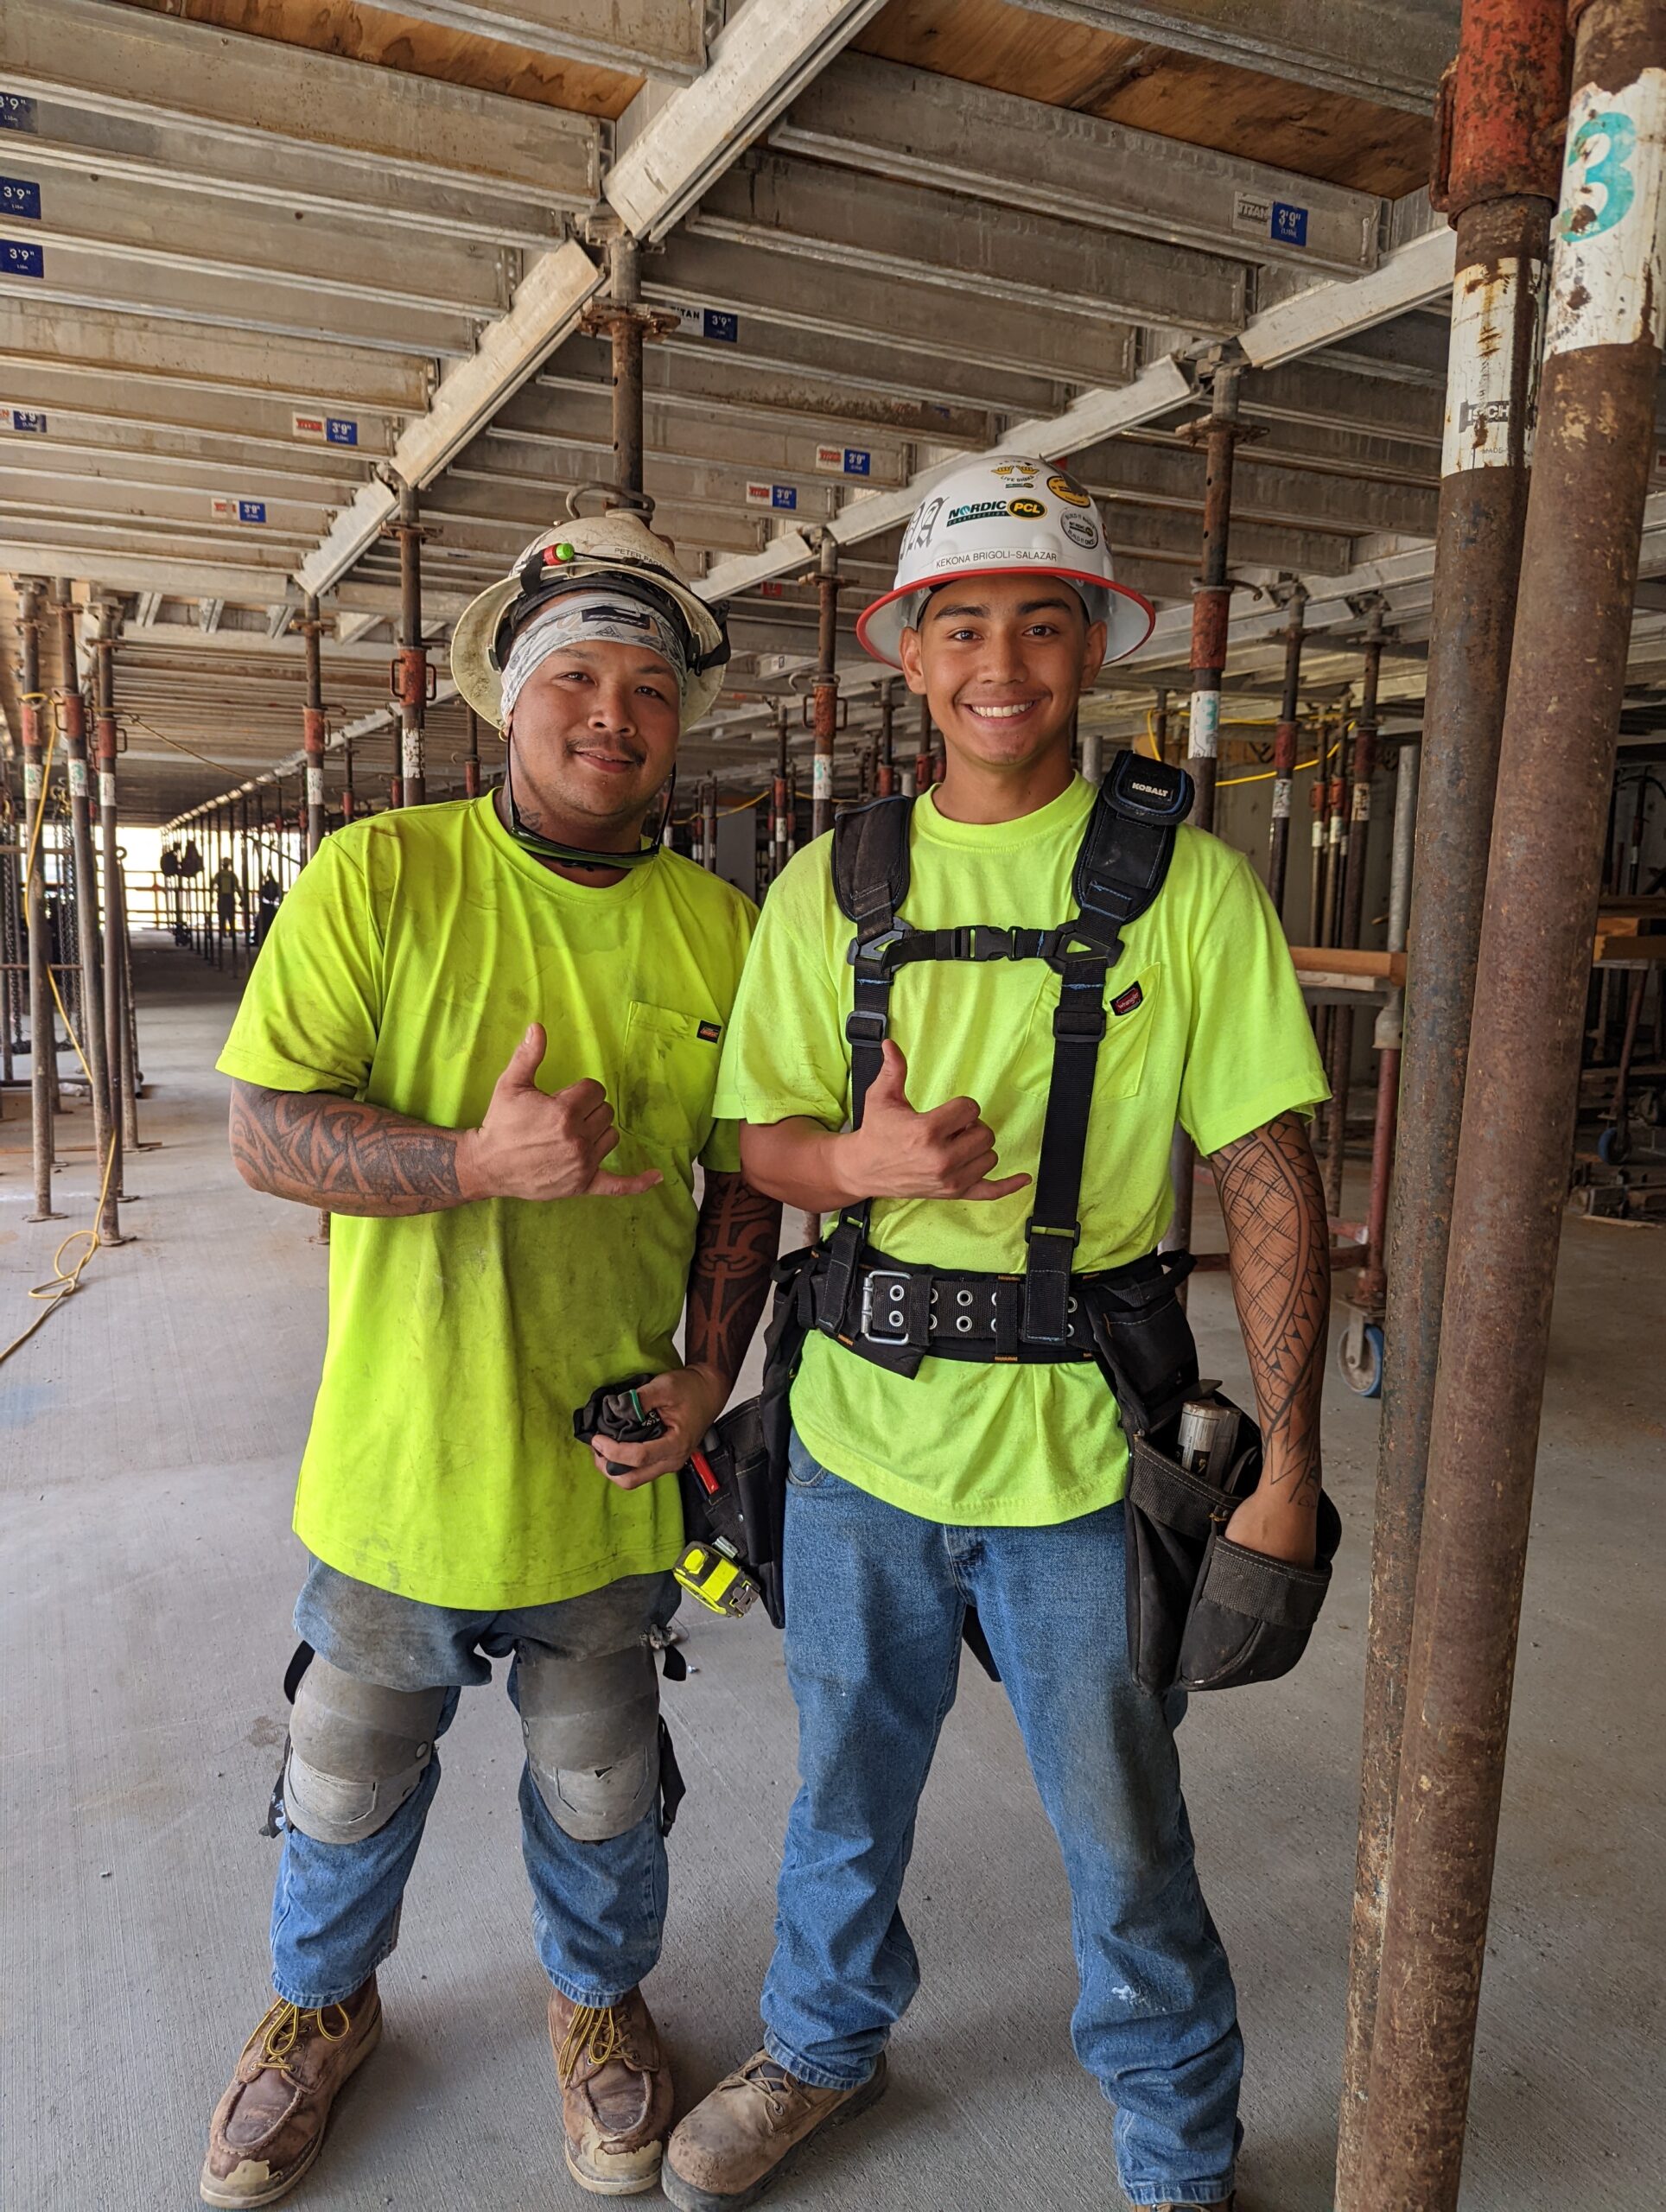 A summer intern and his site supervise show shakas and big smiles on-the-job.